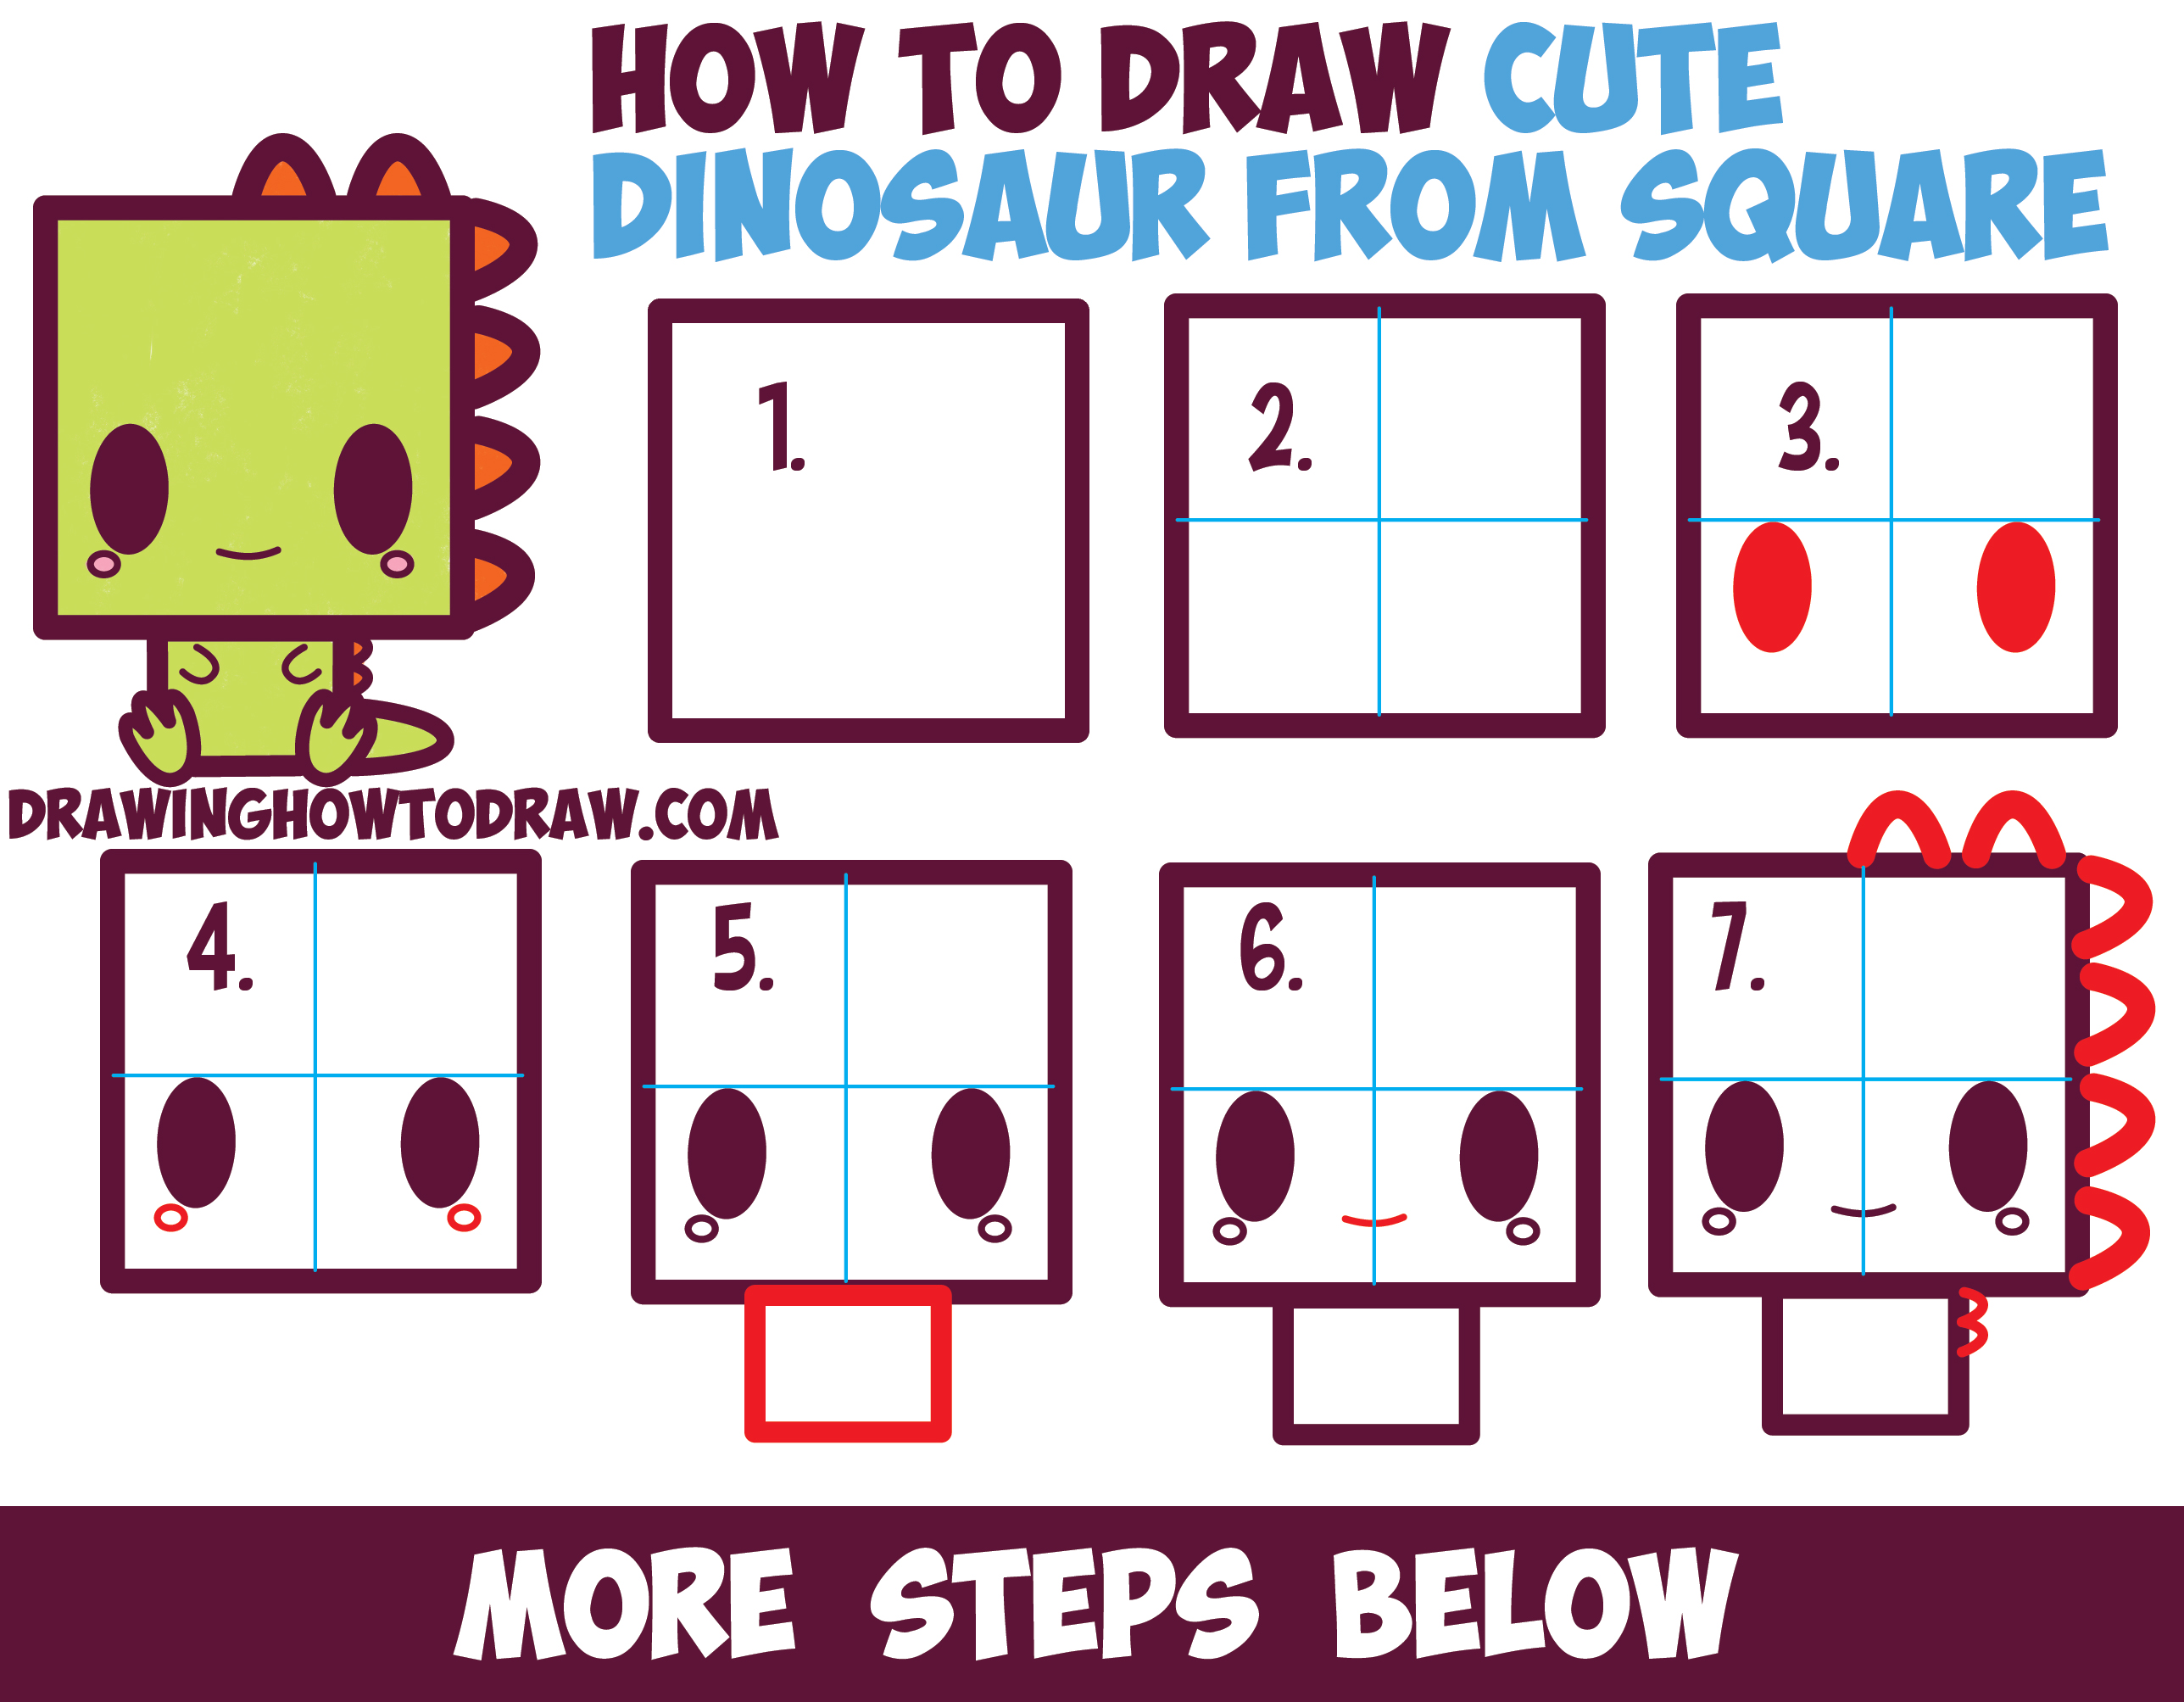 How To Draw Cute Kawaii Cartoon Baby Dinosaur From Squares With Easy Step By Step Drawing Tutorial For Kids How To Draw Step By Step Drawing Tutorials